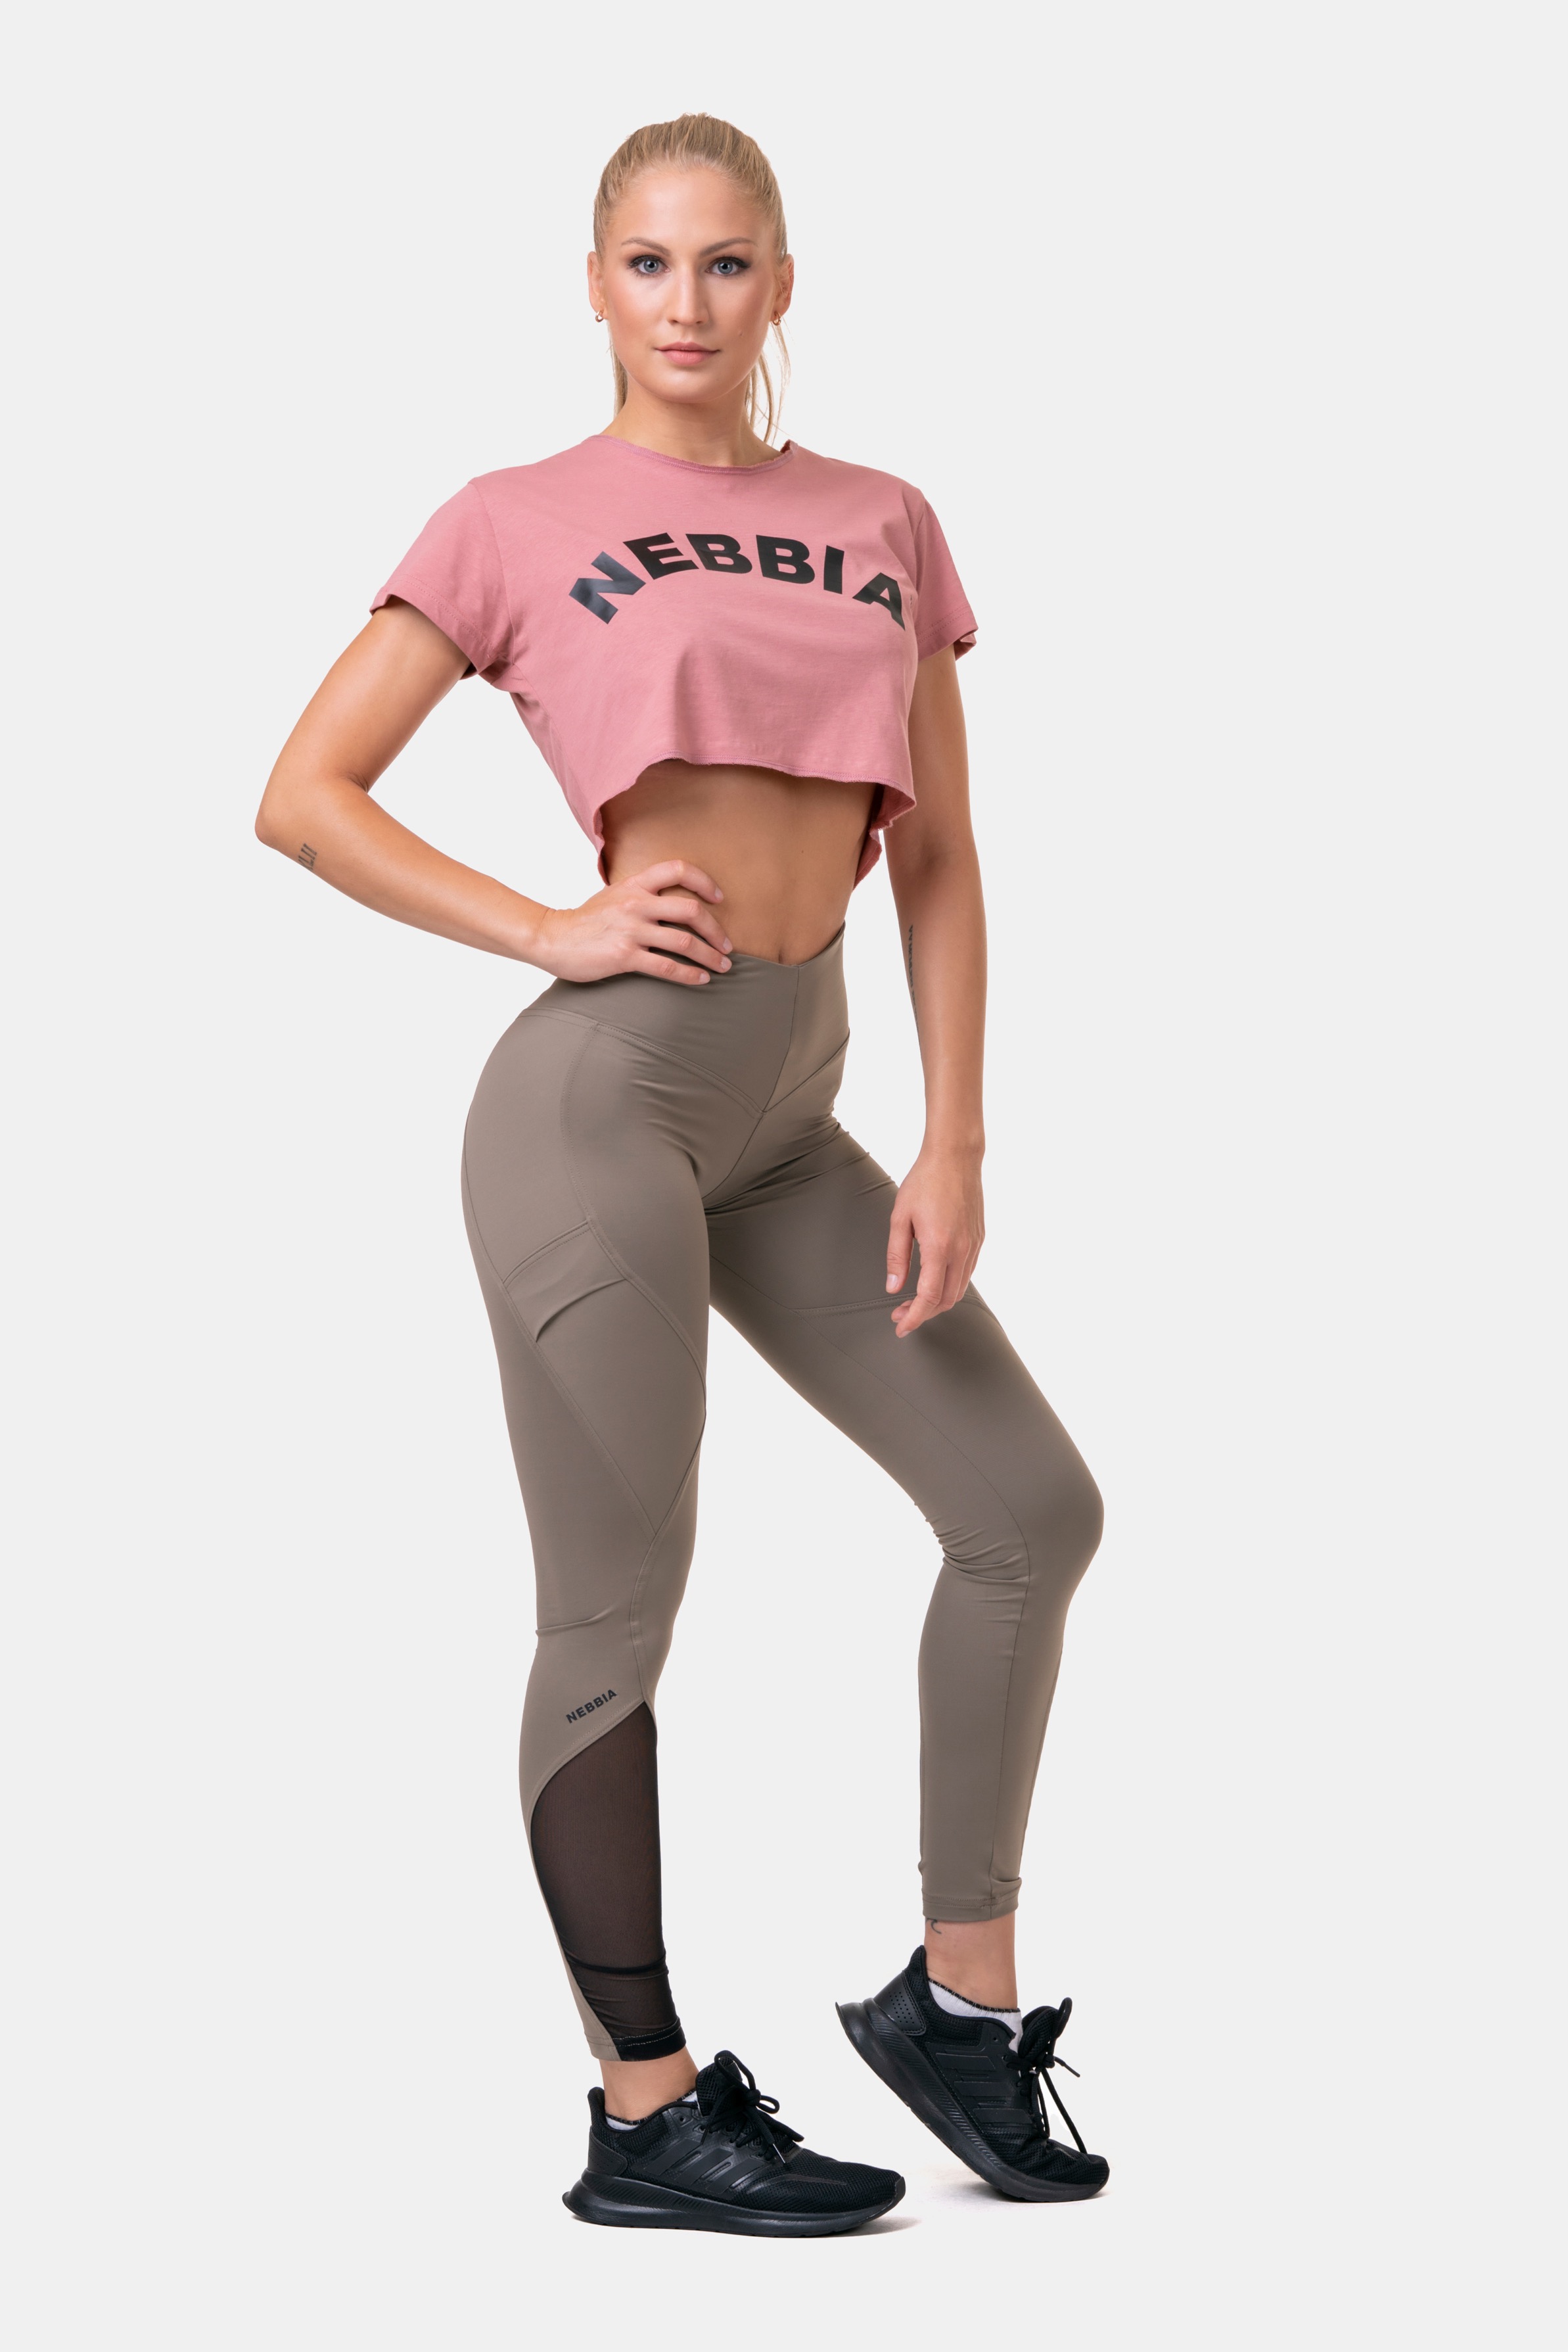 nebbia-volny-crop-top-fit-and-sporty-583-old-rose